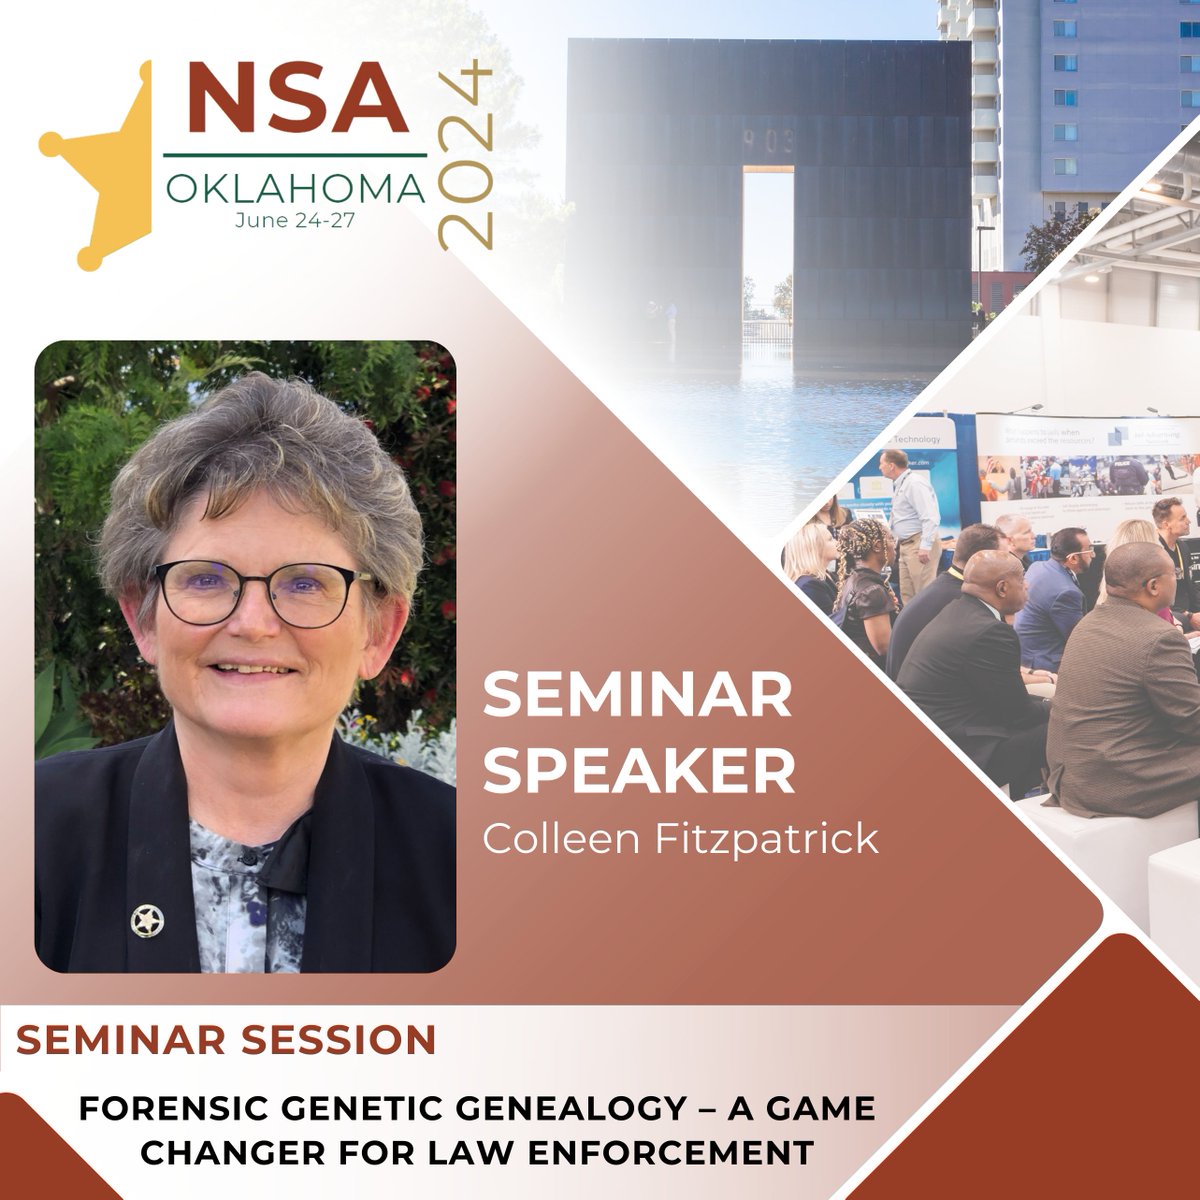 NSA 2024 Annual Conference Speaker Spotlight! #Sheriffs2024 Today we shine a light on Colleen Fitzpatrick, President, Identifinders International. Forensic Genetic Genealogy (FGG) has emerged as a game-changer for resolving cold cases, sometimes decade old. Since it was first